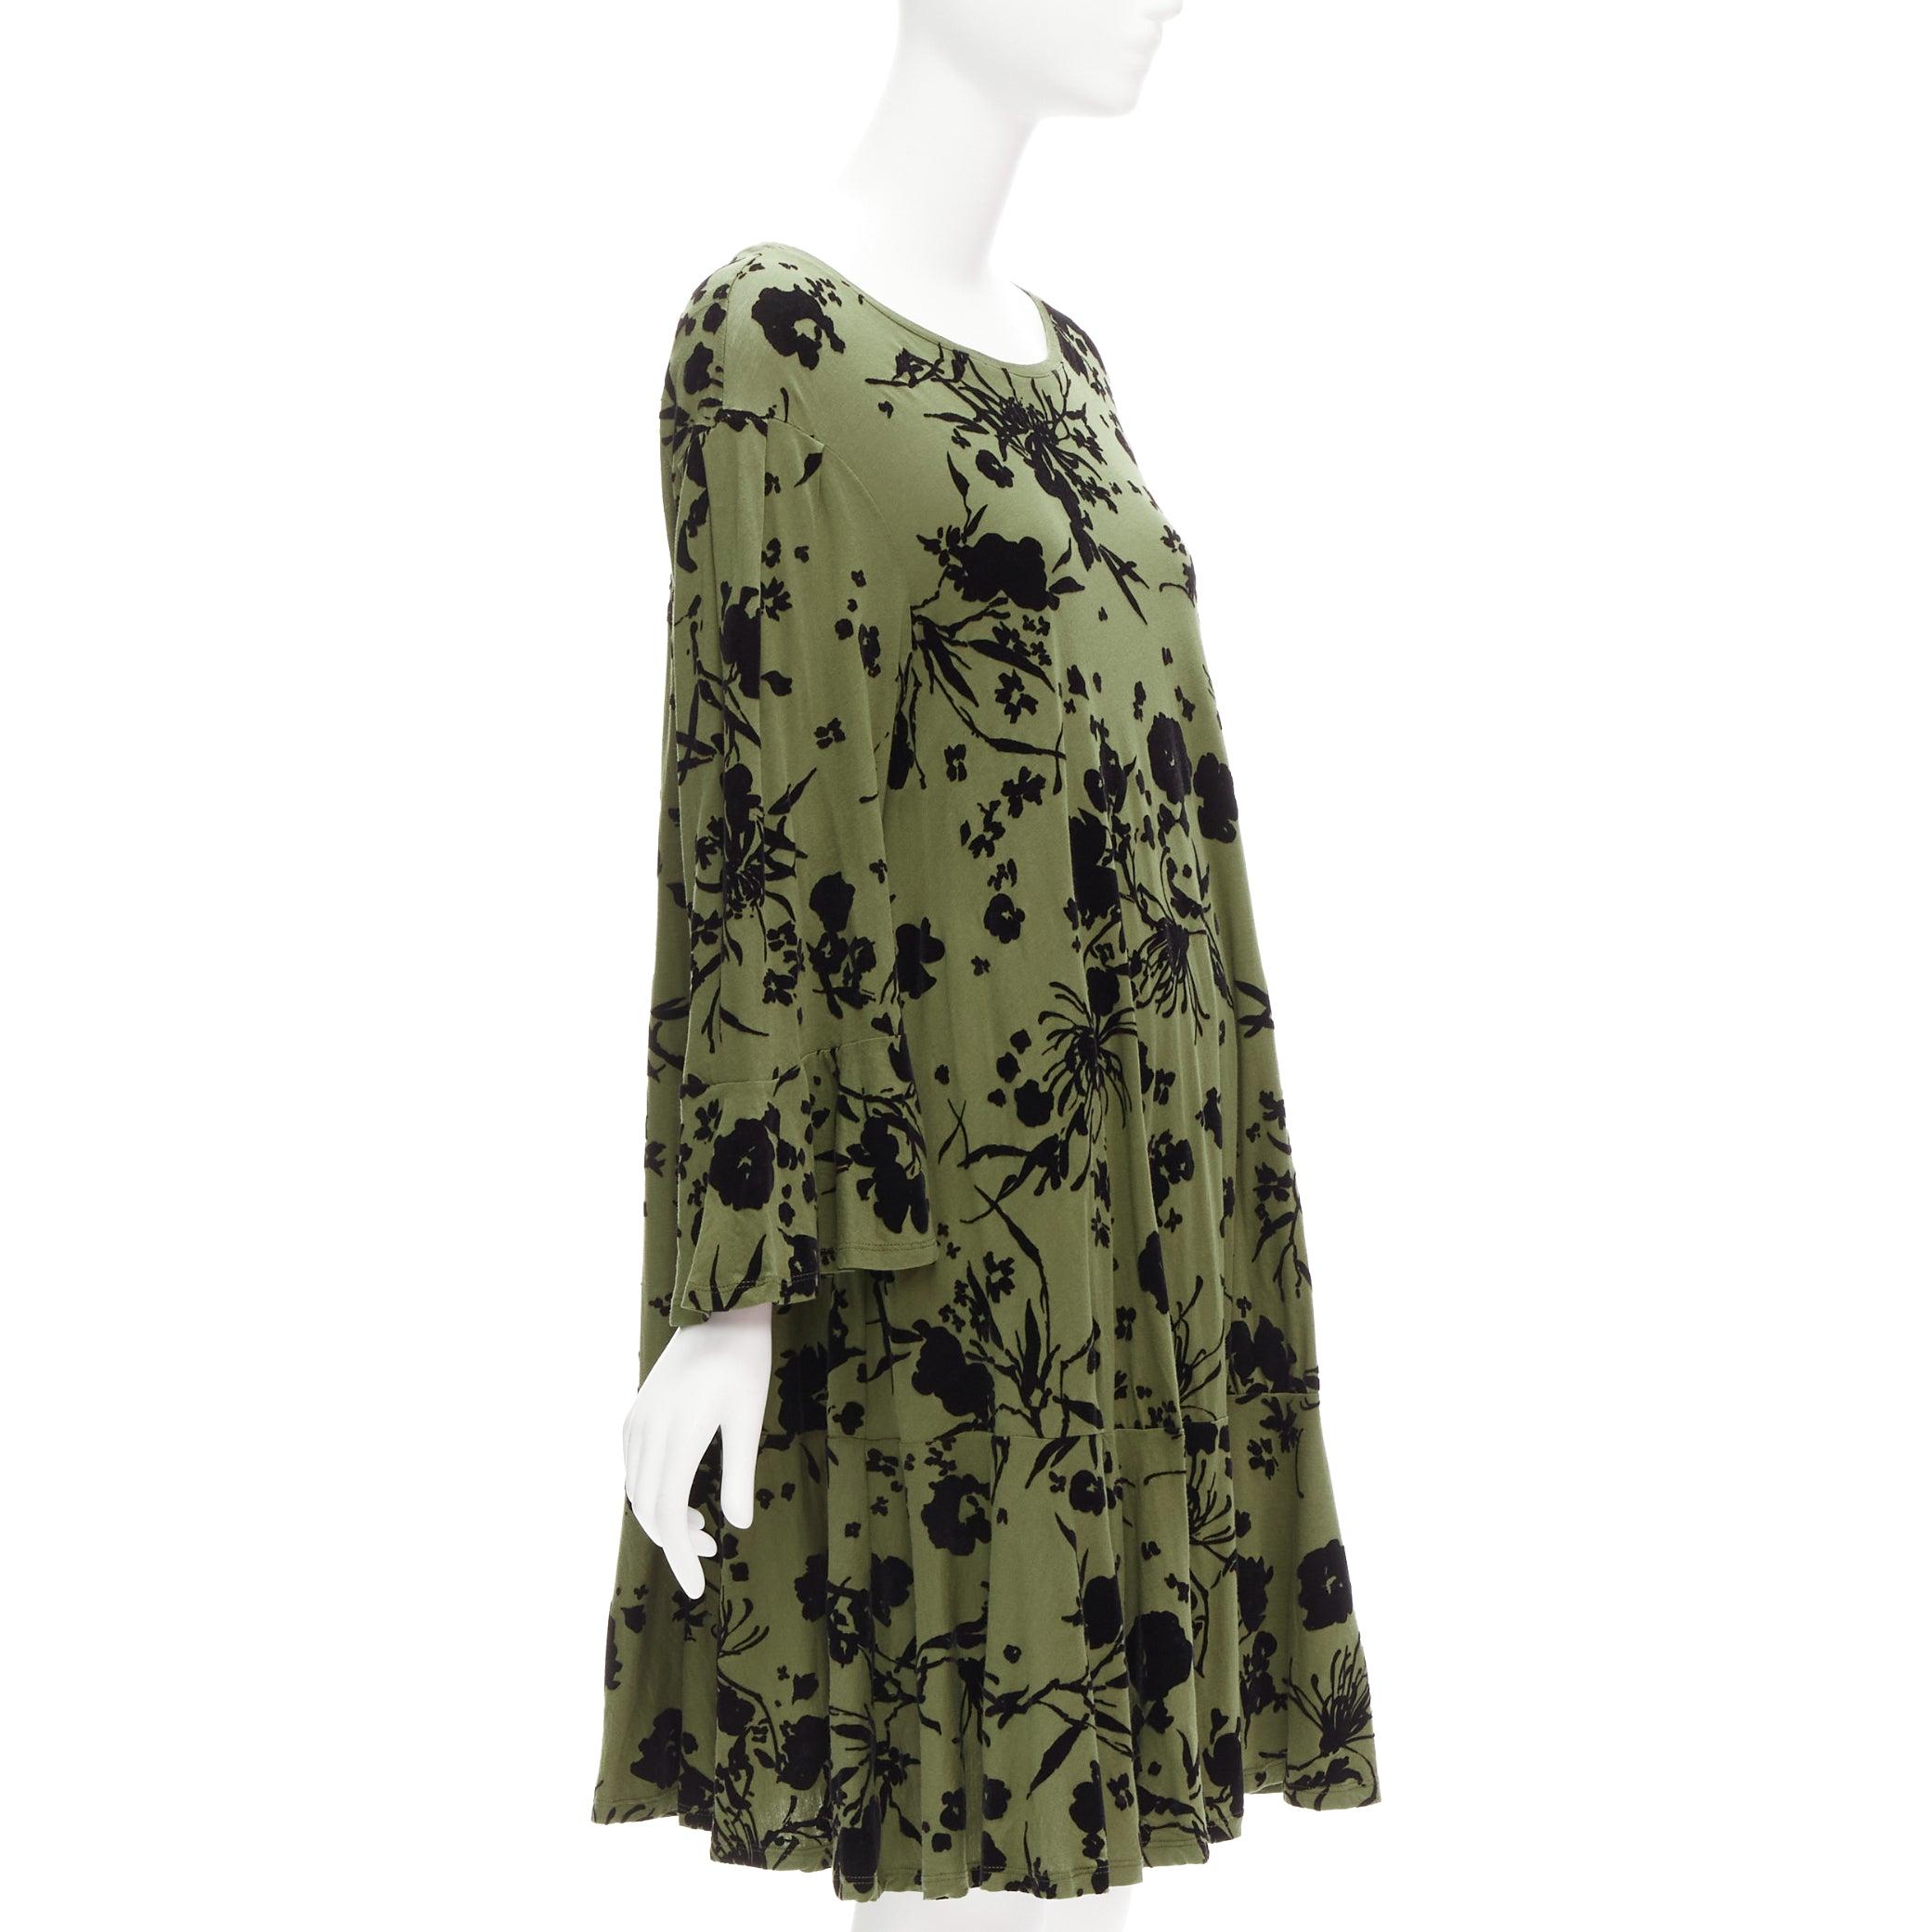 DRIES VAN NOTEN green cotton floral devore bell sleeve flutter dress XS
Reference: CELG/A00368
Brand: Dries Van Noten
Material: Cotton
Color: Green, Black
Pattern: Floral
Closure: Slip On
Extra Details: Bell sleeves.
Made in: